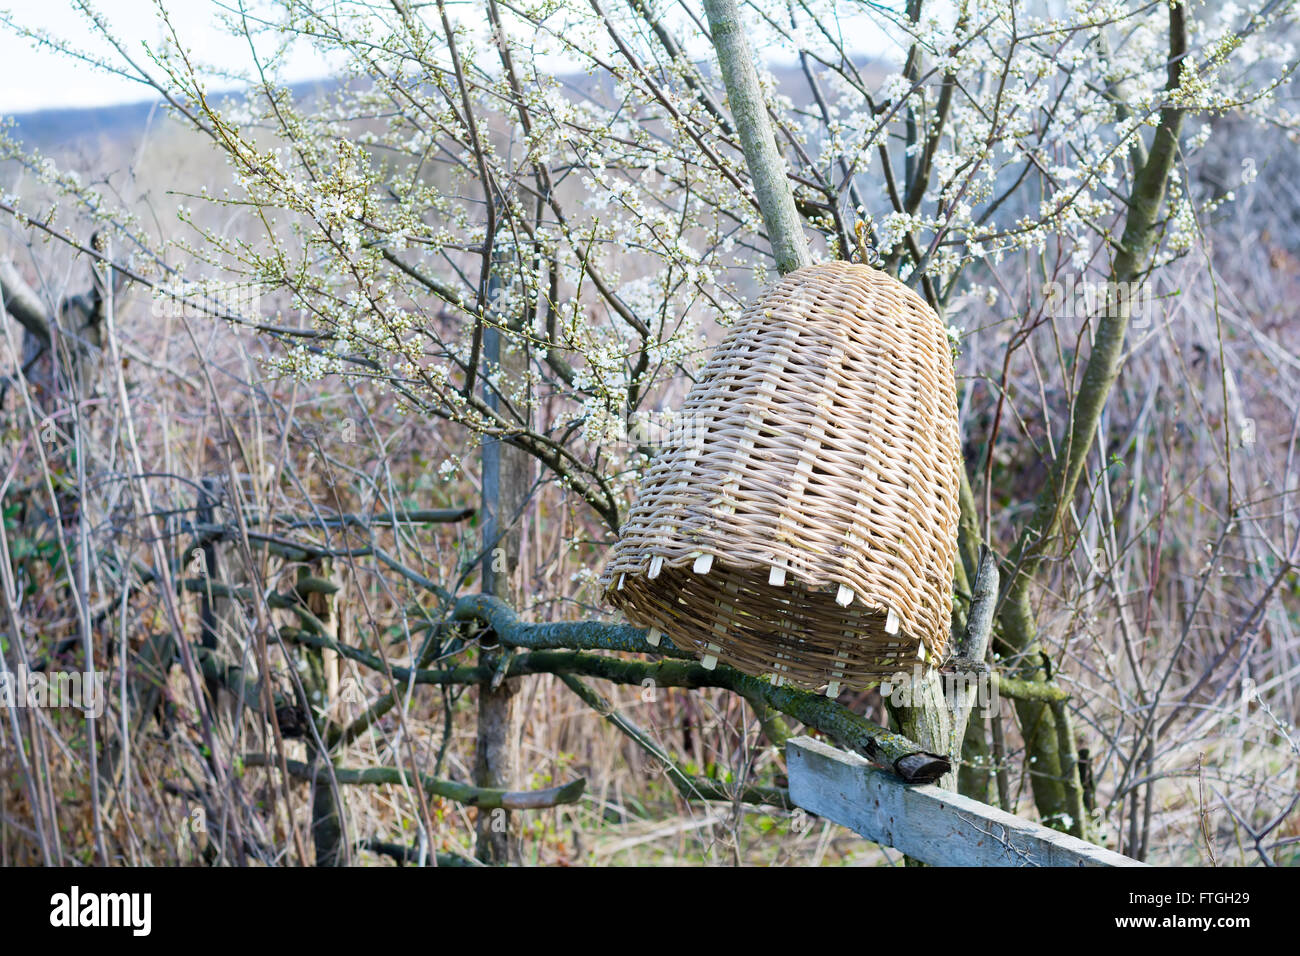 Handmade beehive to capture bee swarms in nature Stock Photo